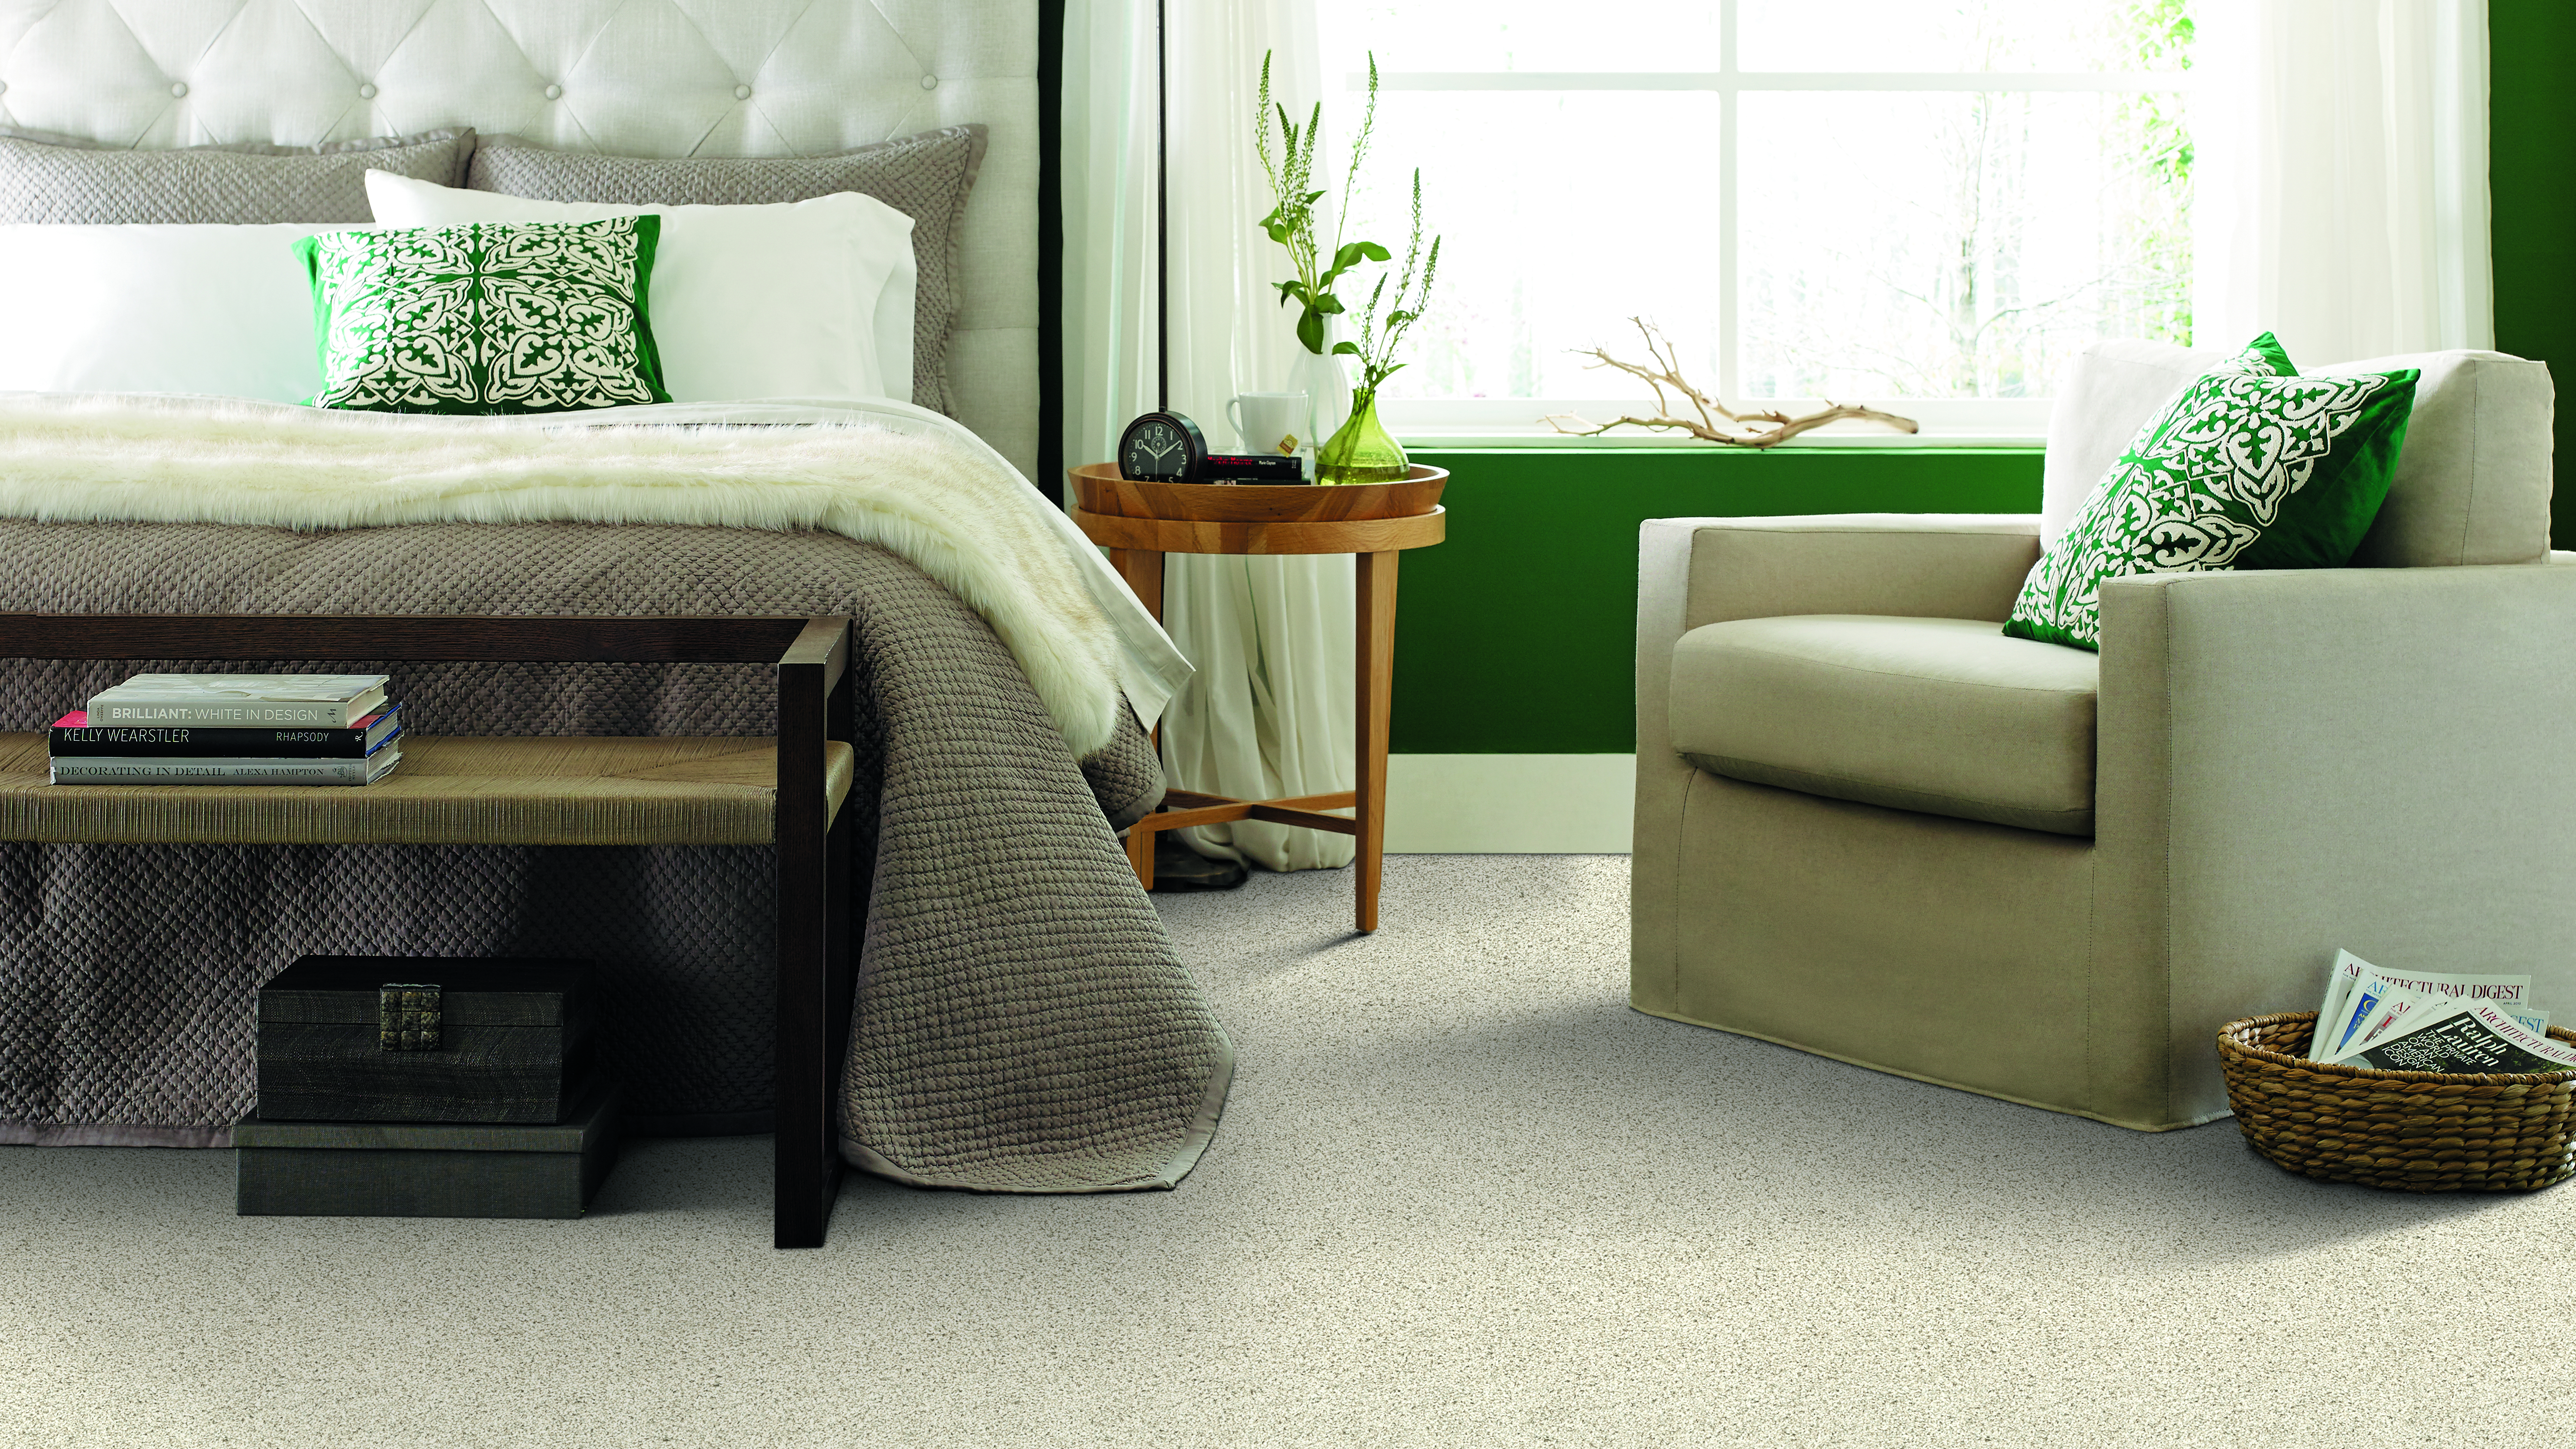 Carpet Flooring with a bedroom with a bed and chair decorated with green pillows 